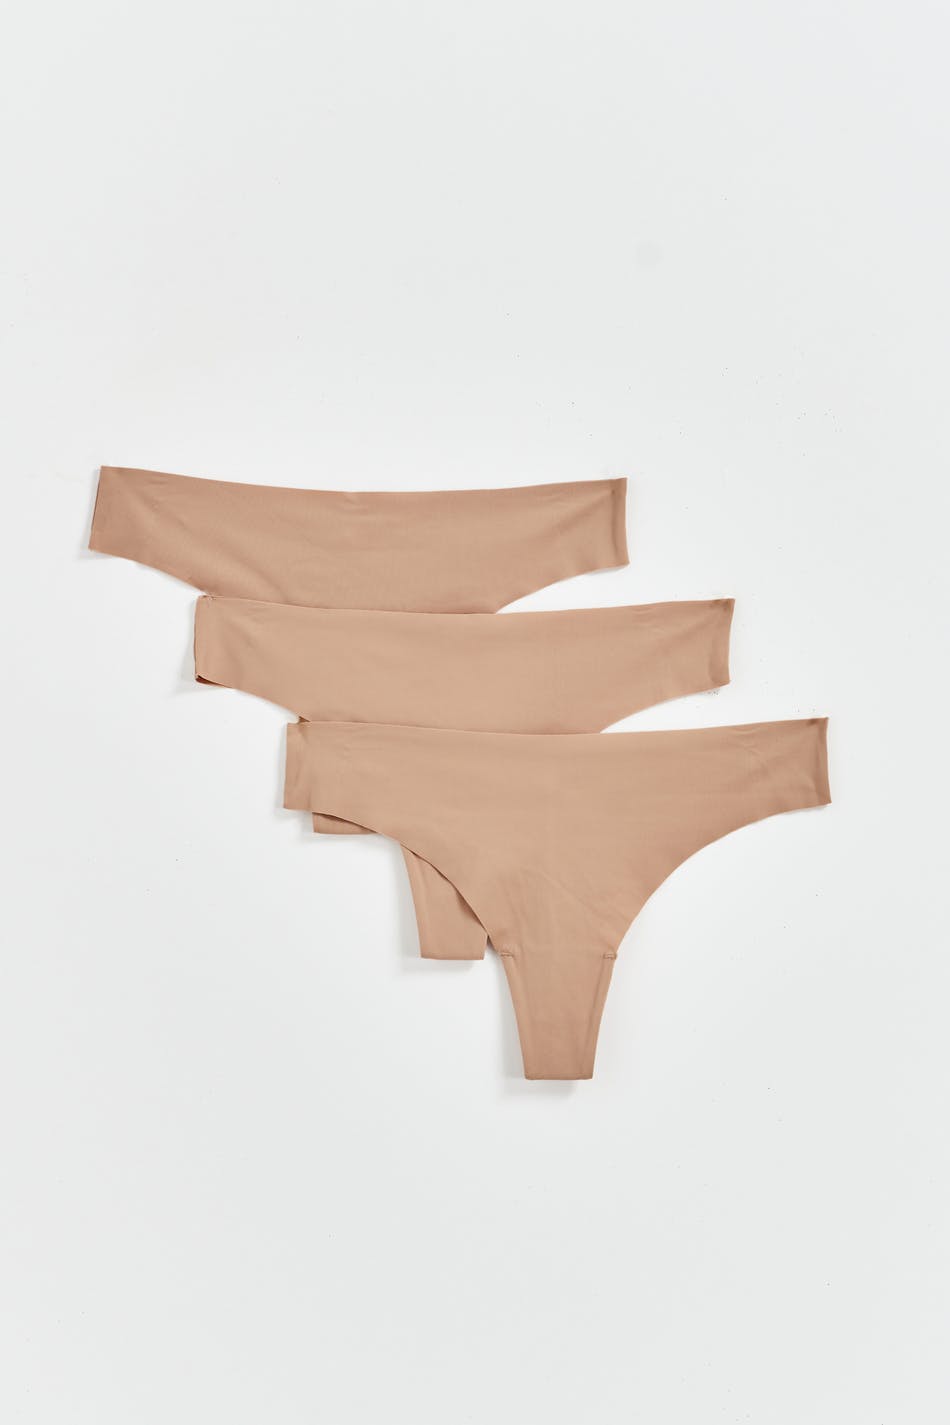 Gina Tricot - 3-pack invisible thong - trosor-3-pack - Beige - S - Female